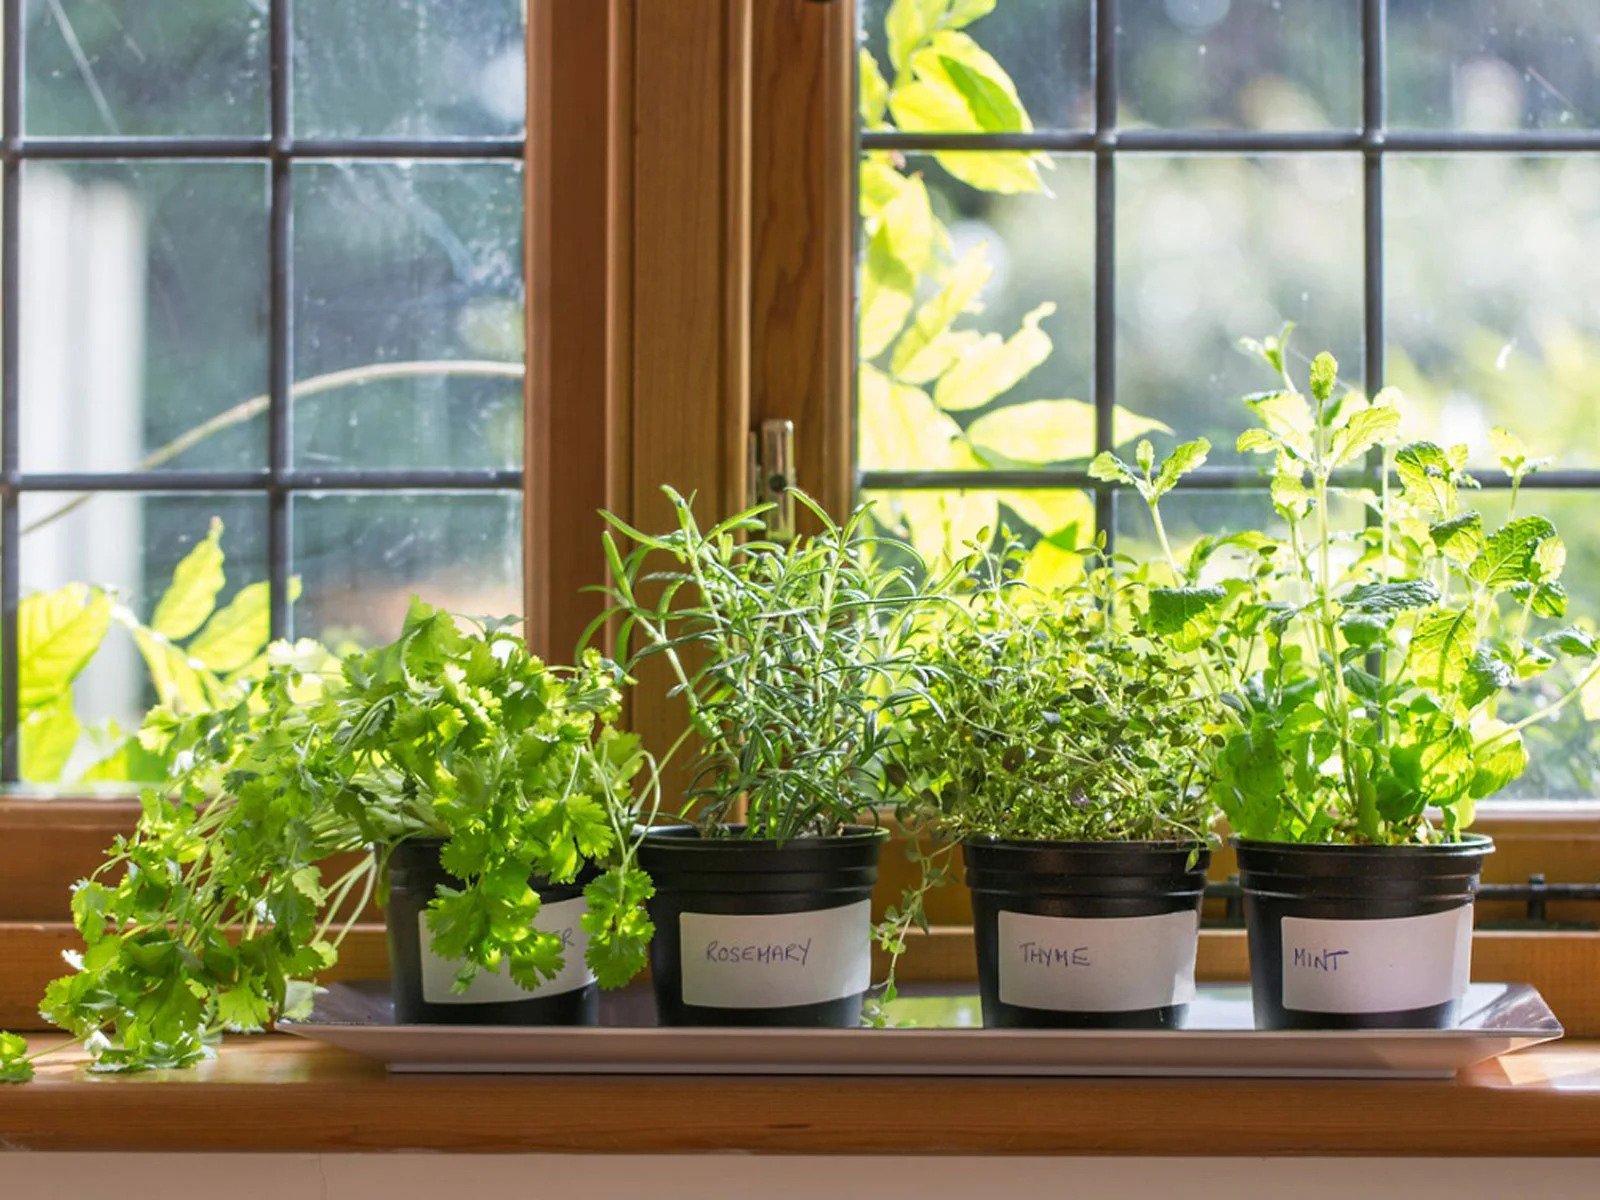 How To Take Care Of Herbs